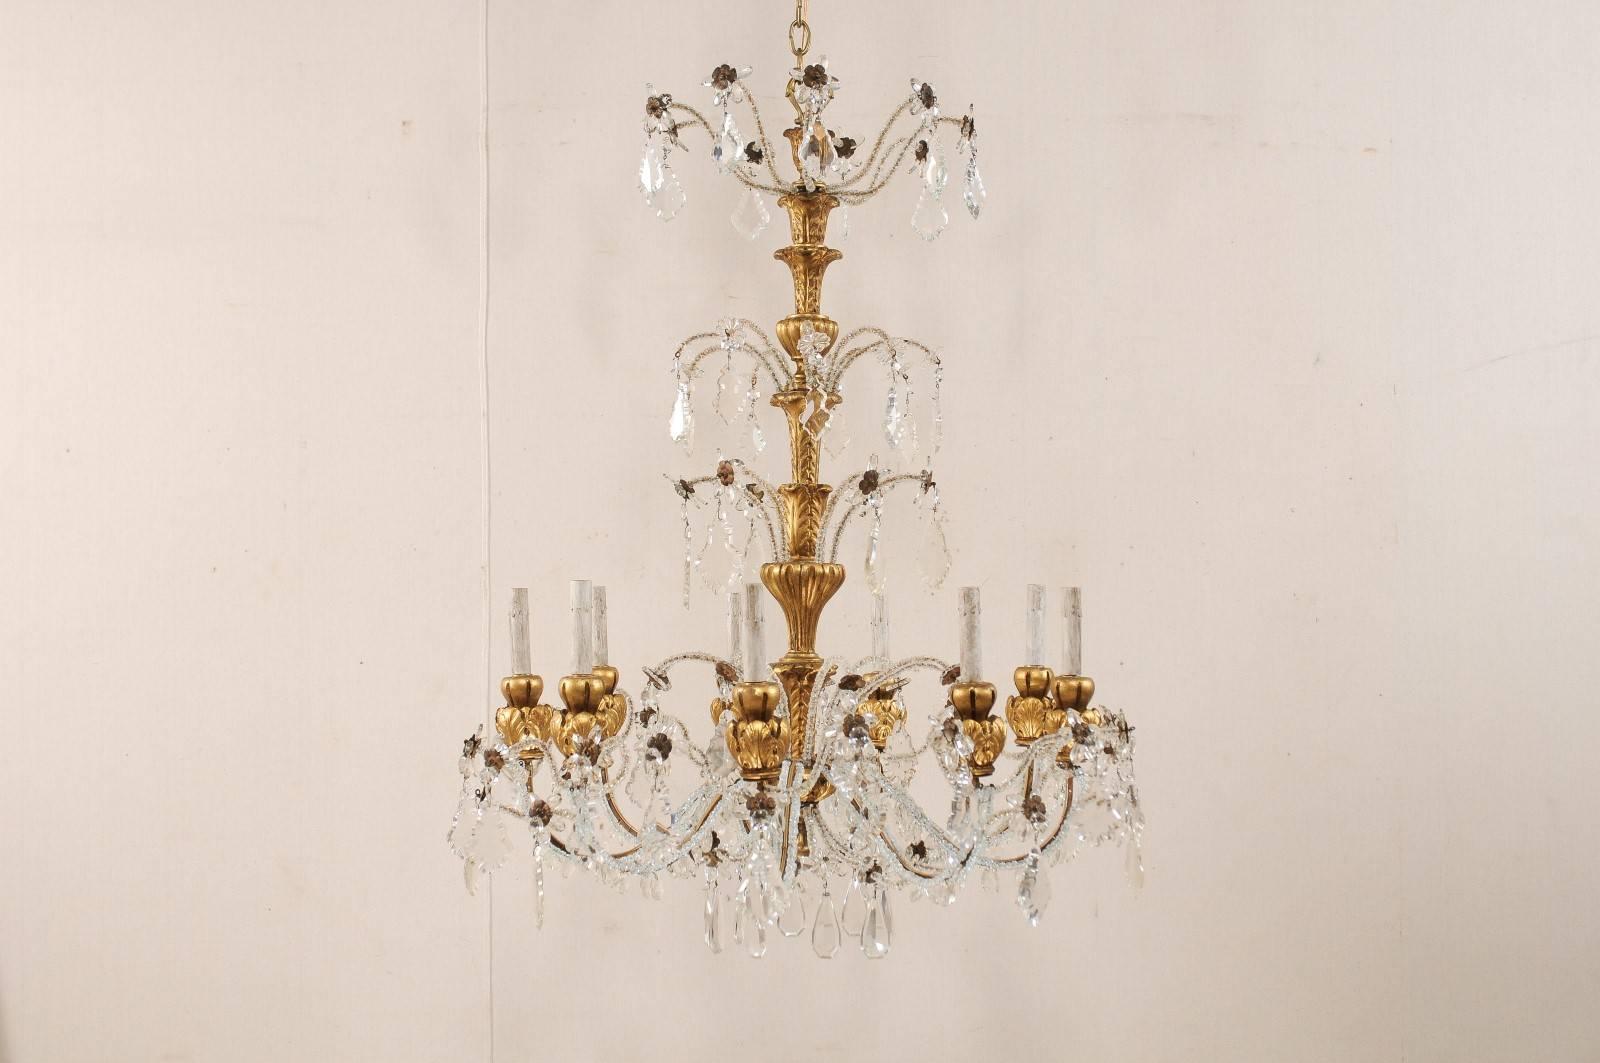 A vintage Italian nine-light crystal and wood chandelier. This Italian chandelier from the mid to late 20th century features a tall gilt, painted and beautifully carved wood central column, with a three-tiered crystal and Italian glass bead